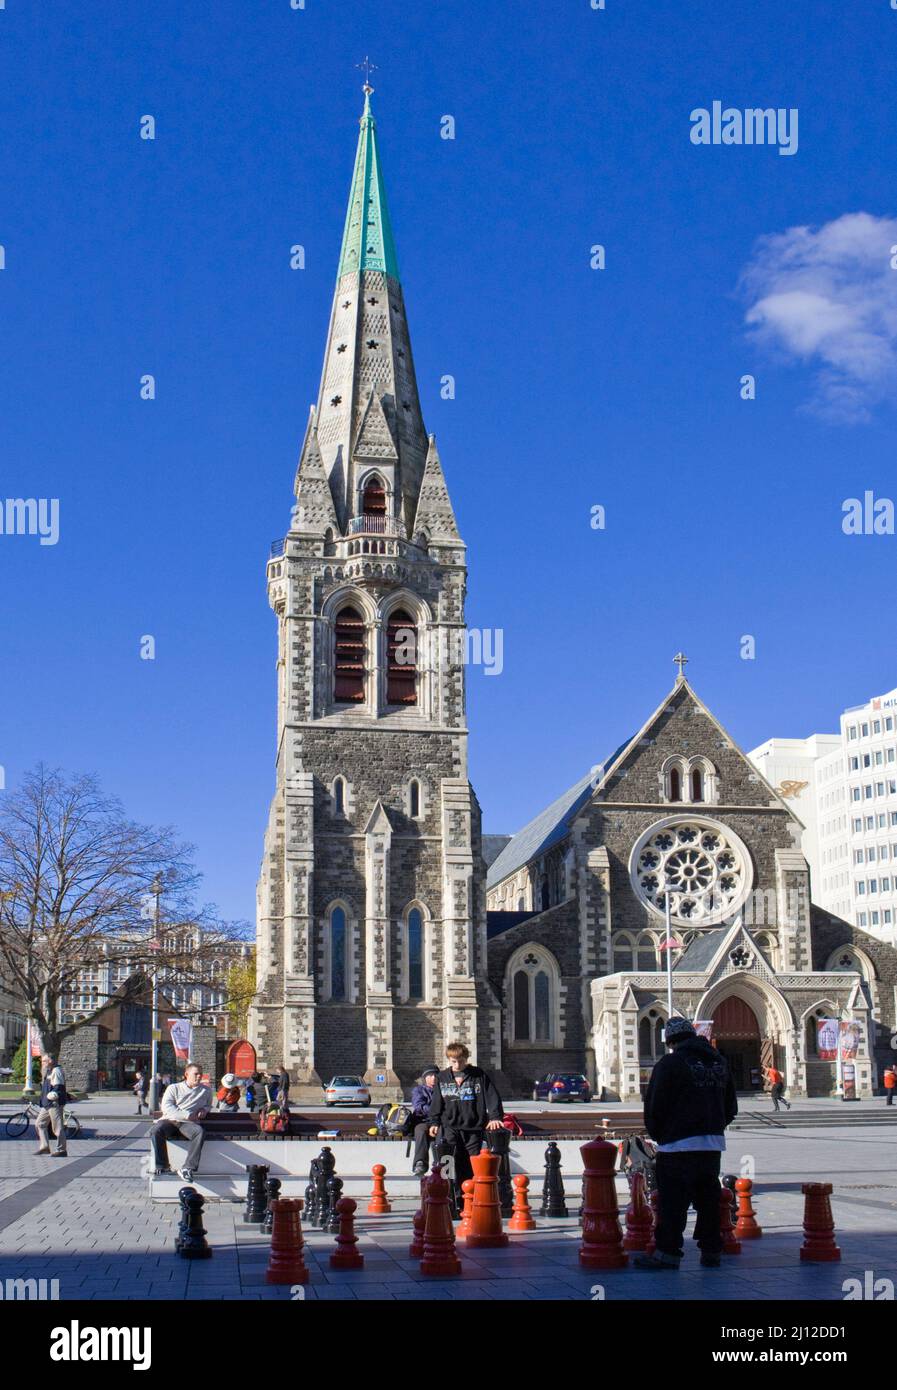 The game of Chess being played in front of Christ Church Cathedral, which was designed by Sir George Gilbert Scott and was constructed in the 1860s. Stock Photo